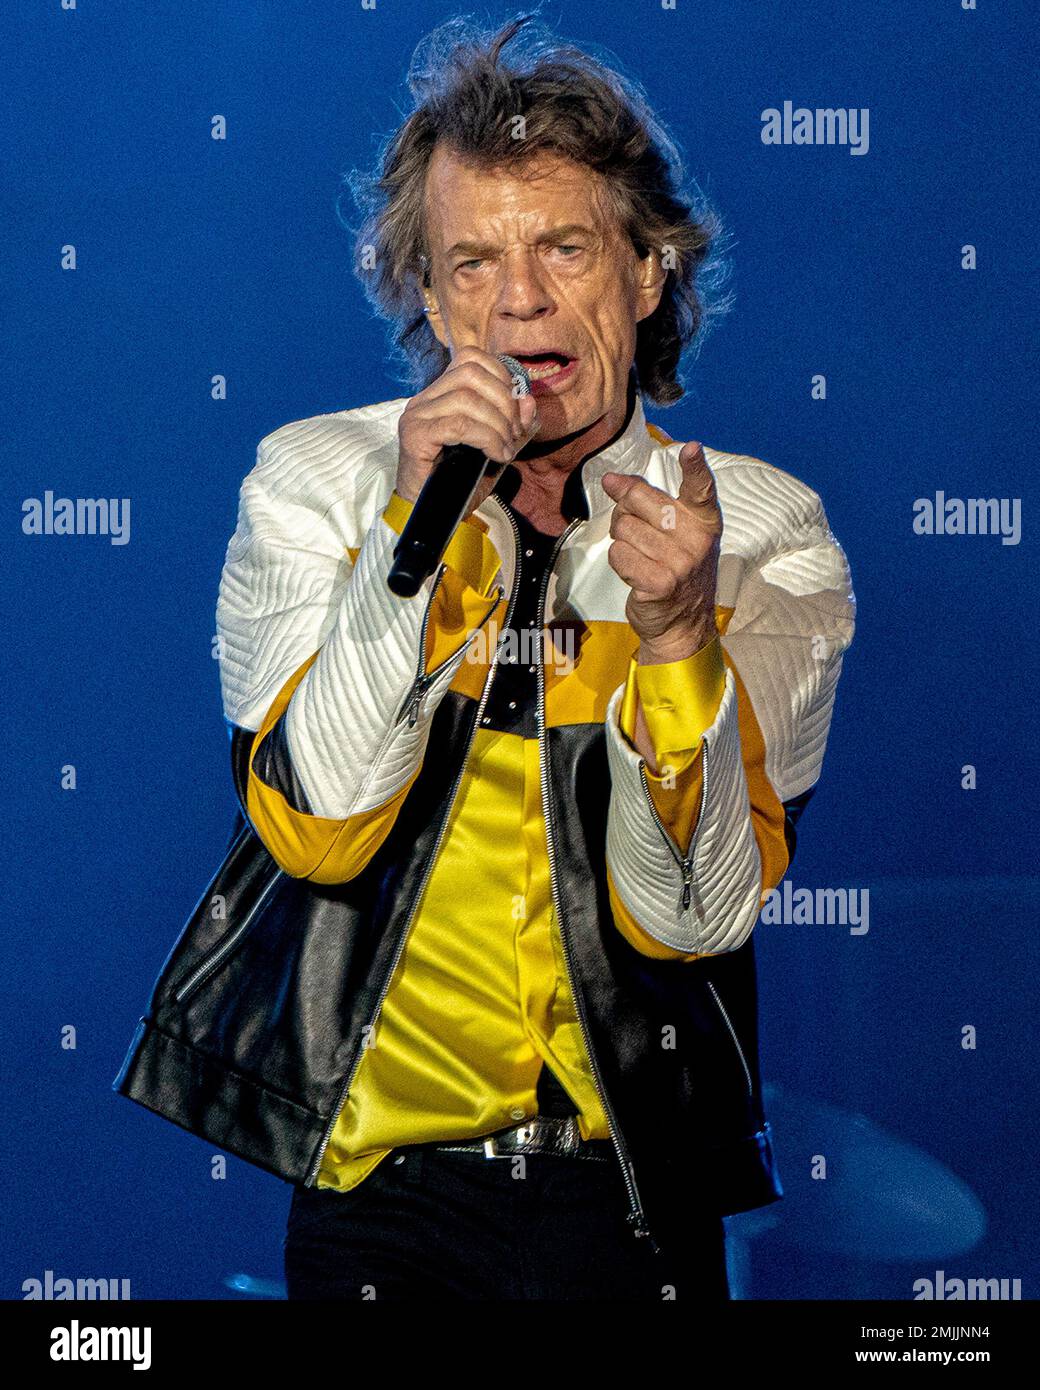 Lead vocalist Mick Jagger of The Rolling Stones performs with the band  during their No Filter Tour at Gillette Stadium on Sunday, July 7, 2019, in  Foxborough, Mass. (Photo by Robert E.